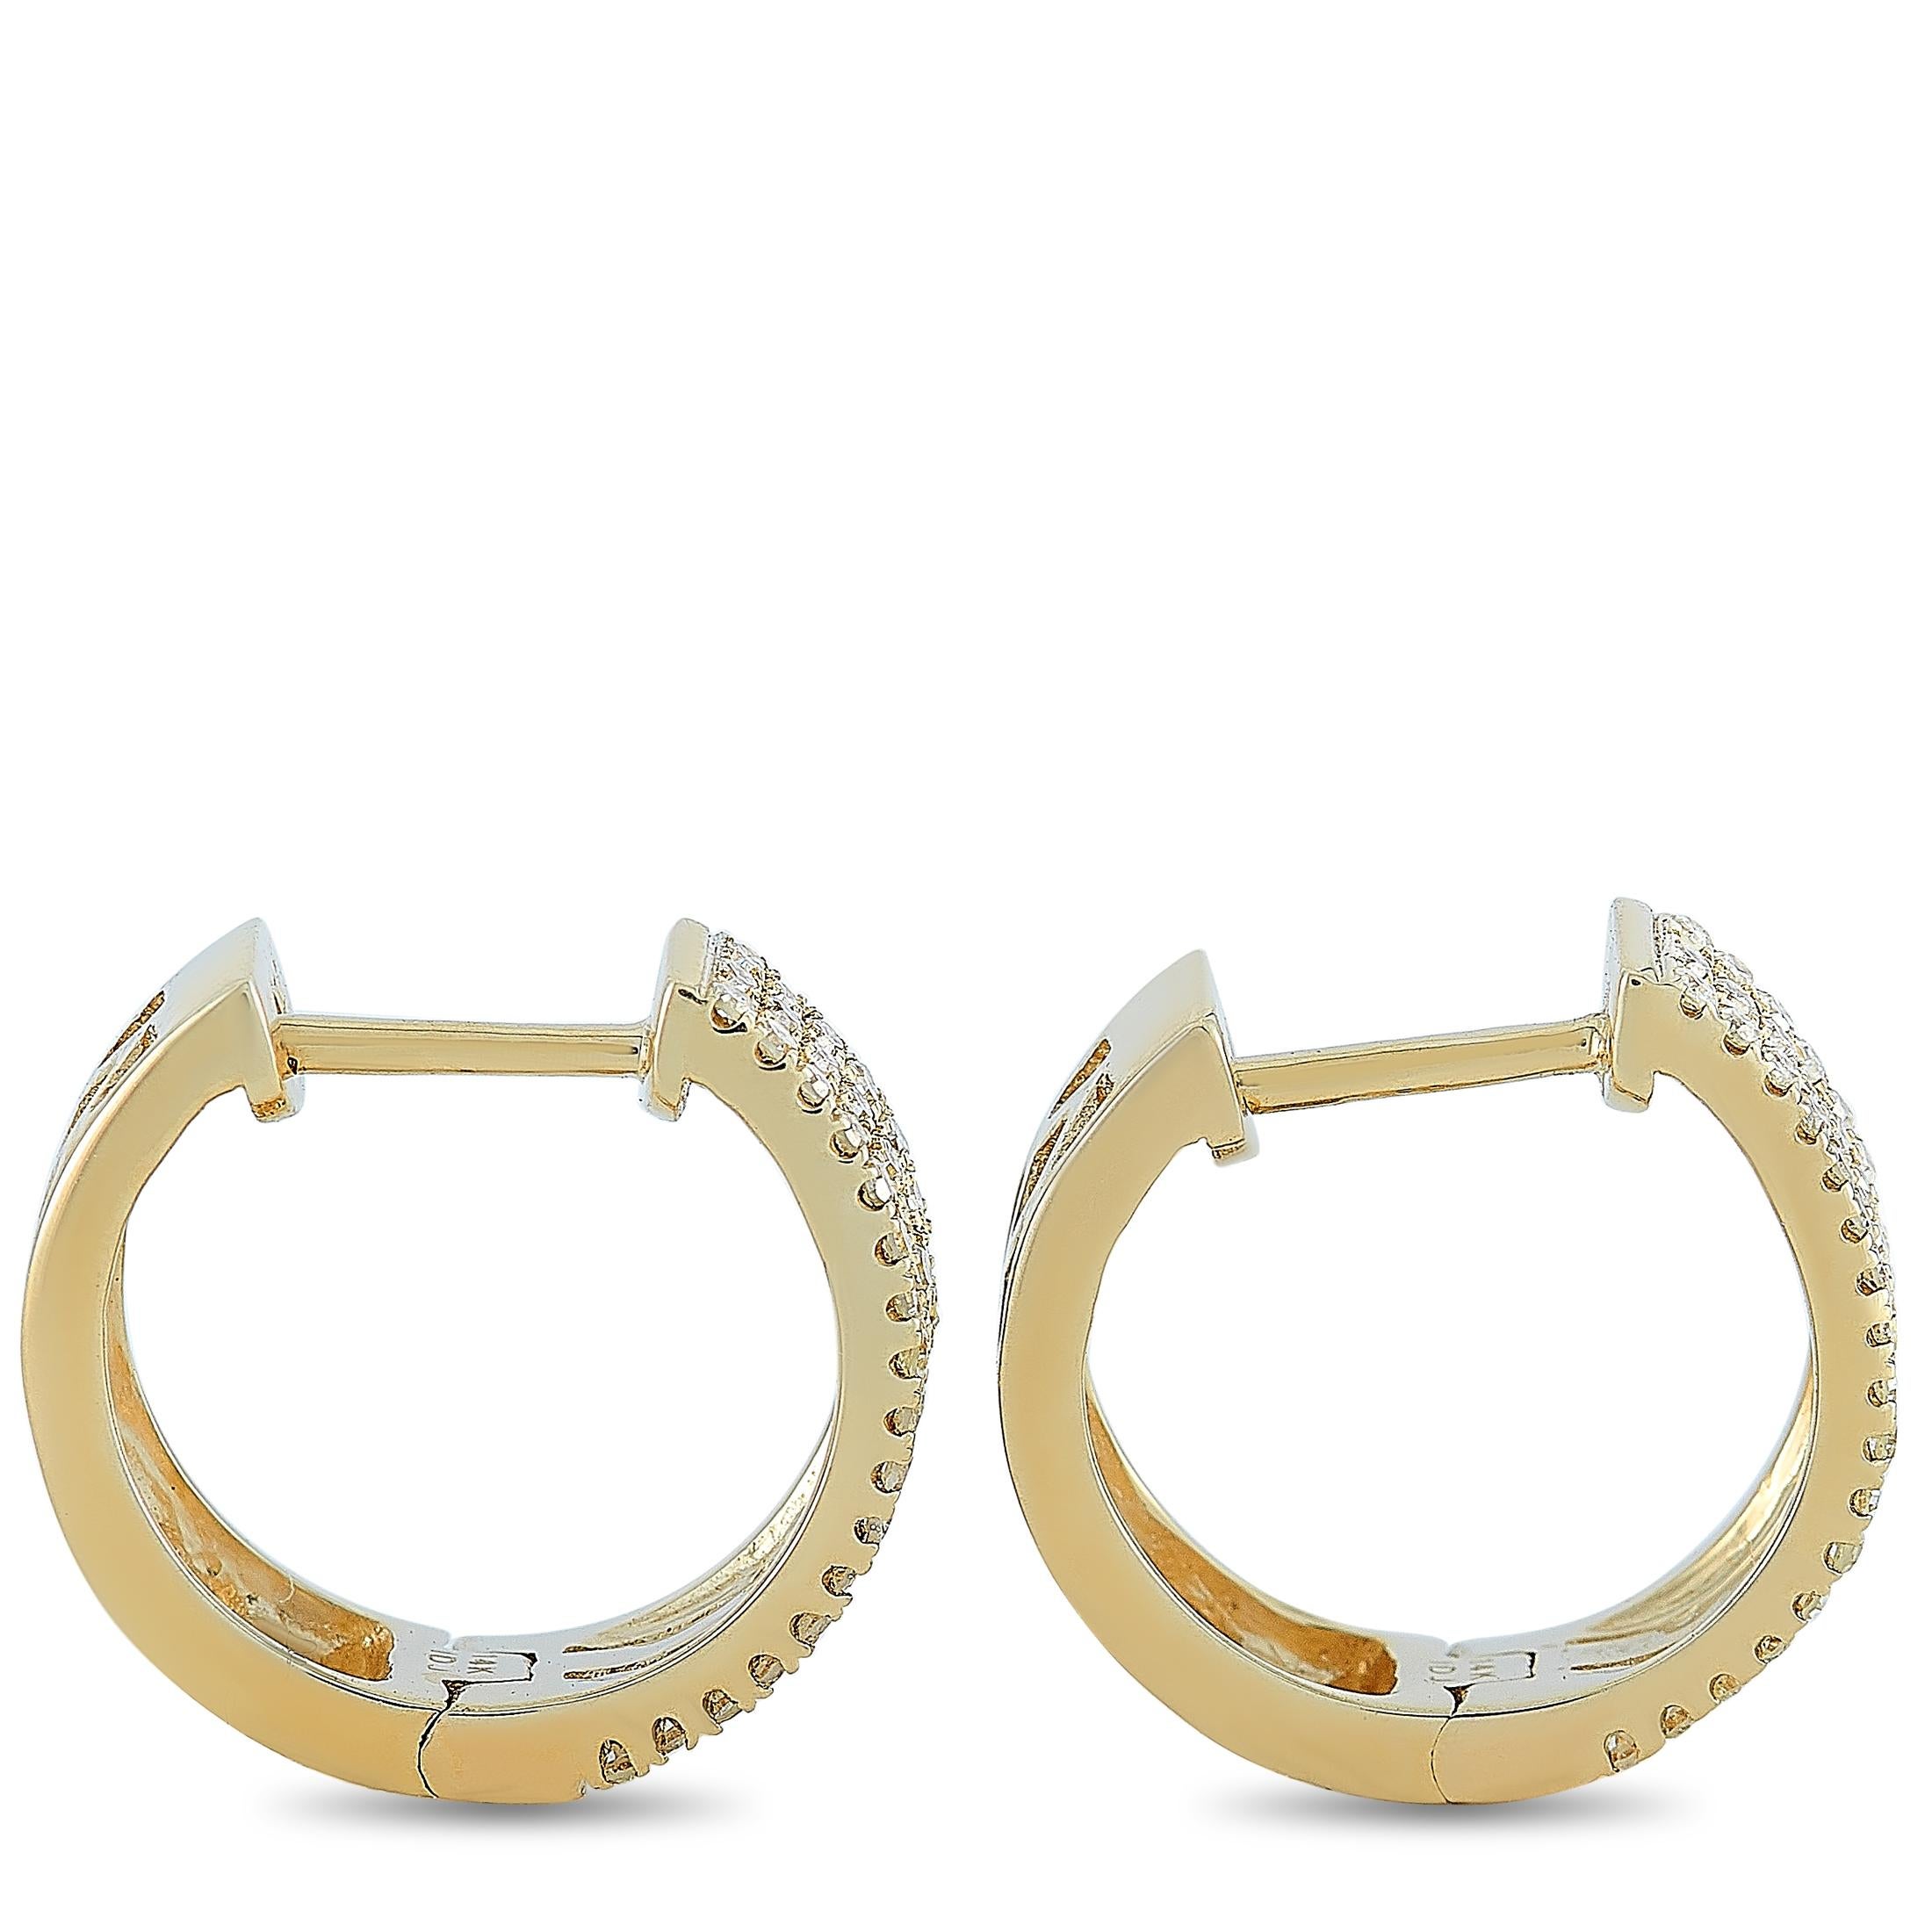 These LB Exclusive hoop earrings are made of 14K yellow gold and each of the two weighs 1.15 grams. They measure 0.50” in length and 0.50” in width. The pair is embellished with diamonds that amount to 0.33 carats.
 
 The earrings are offered in